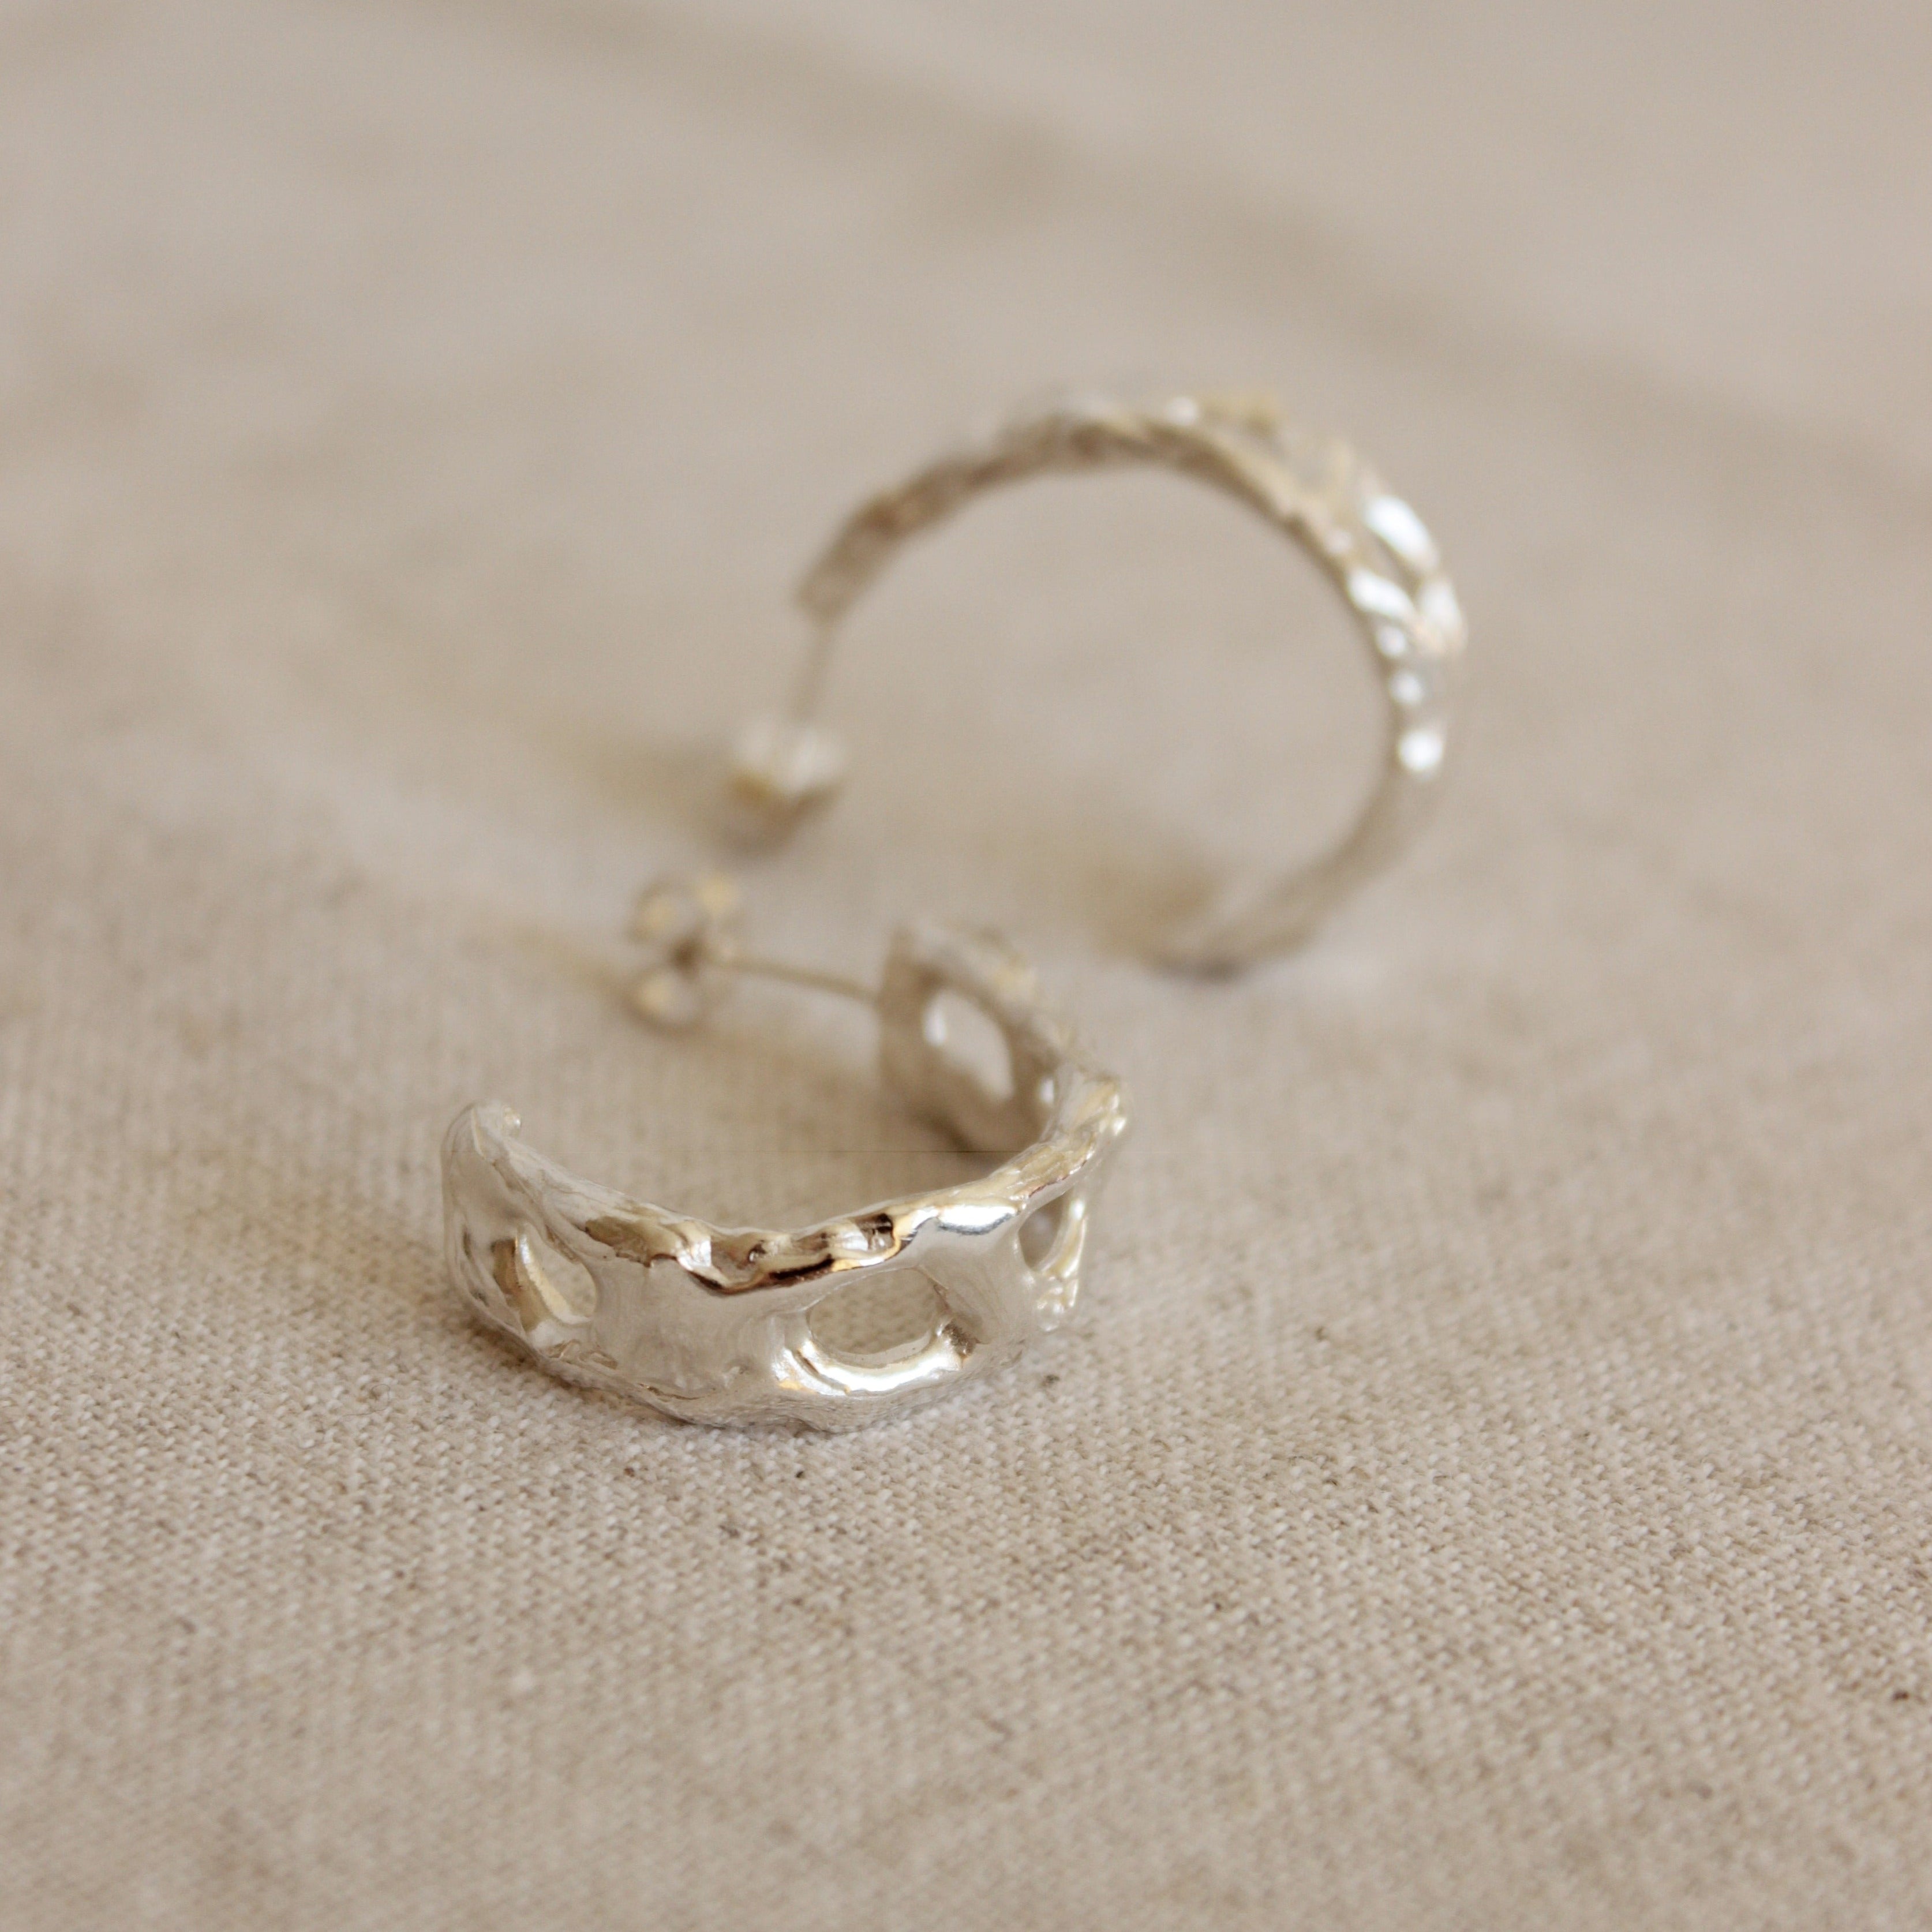 The timeless Cara hoop earrings are lightweight and perfect for everyday wear. Enjoy how these beautiful treasures lift your spirits and outfit effortlessly. The design is a representation of making room for yourself and allowing time to reflect and be present.